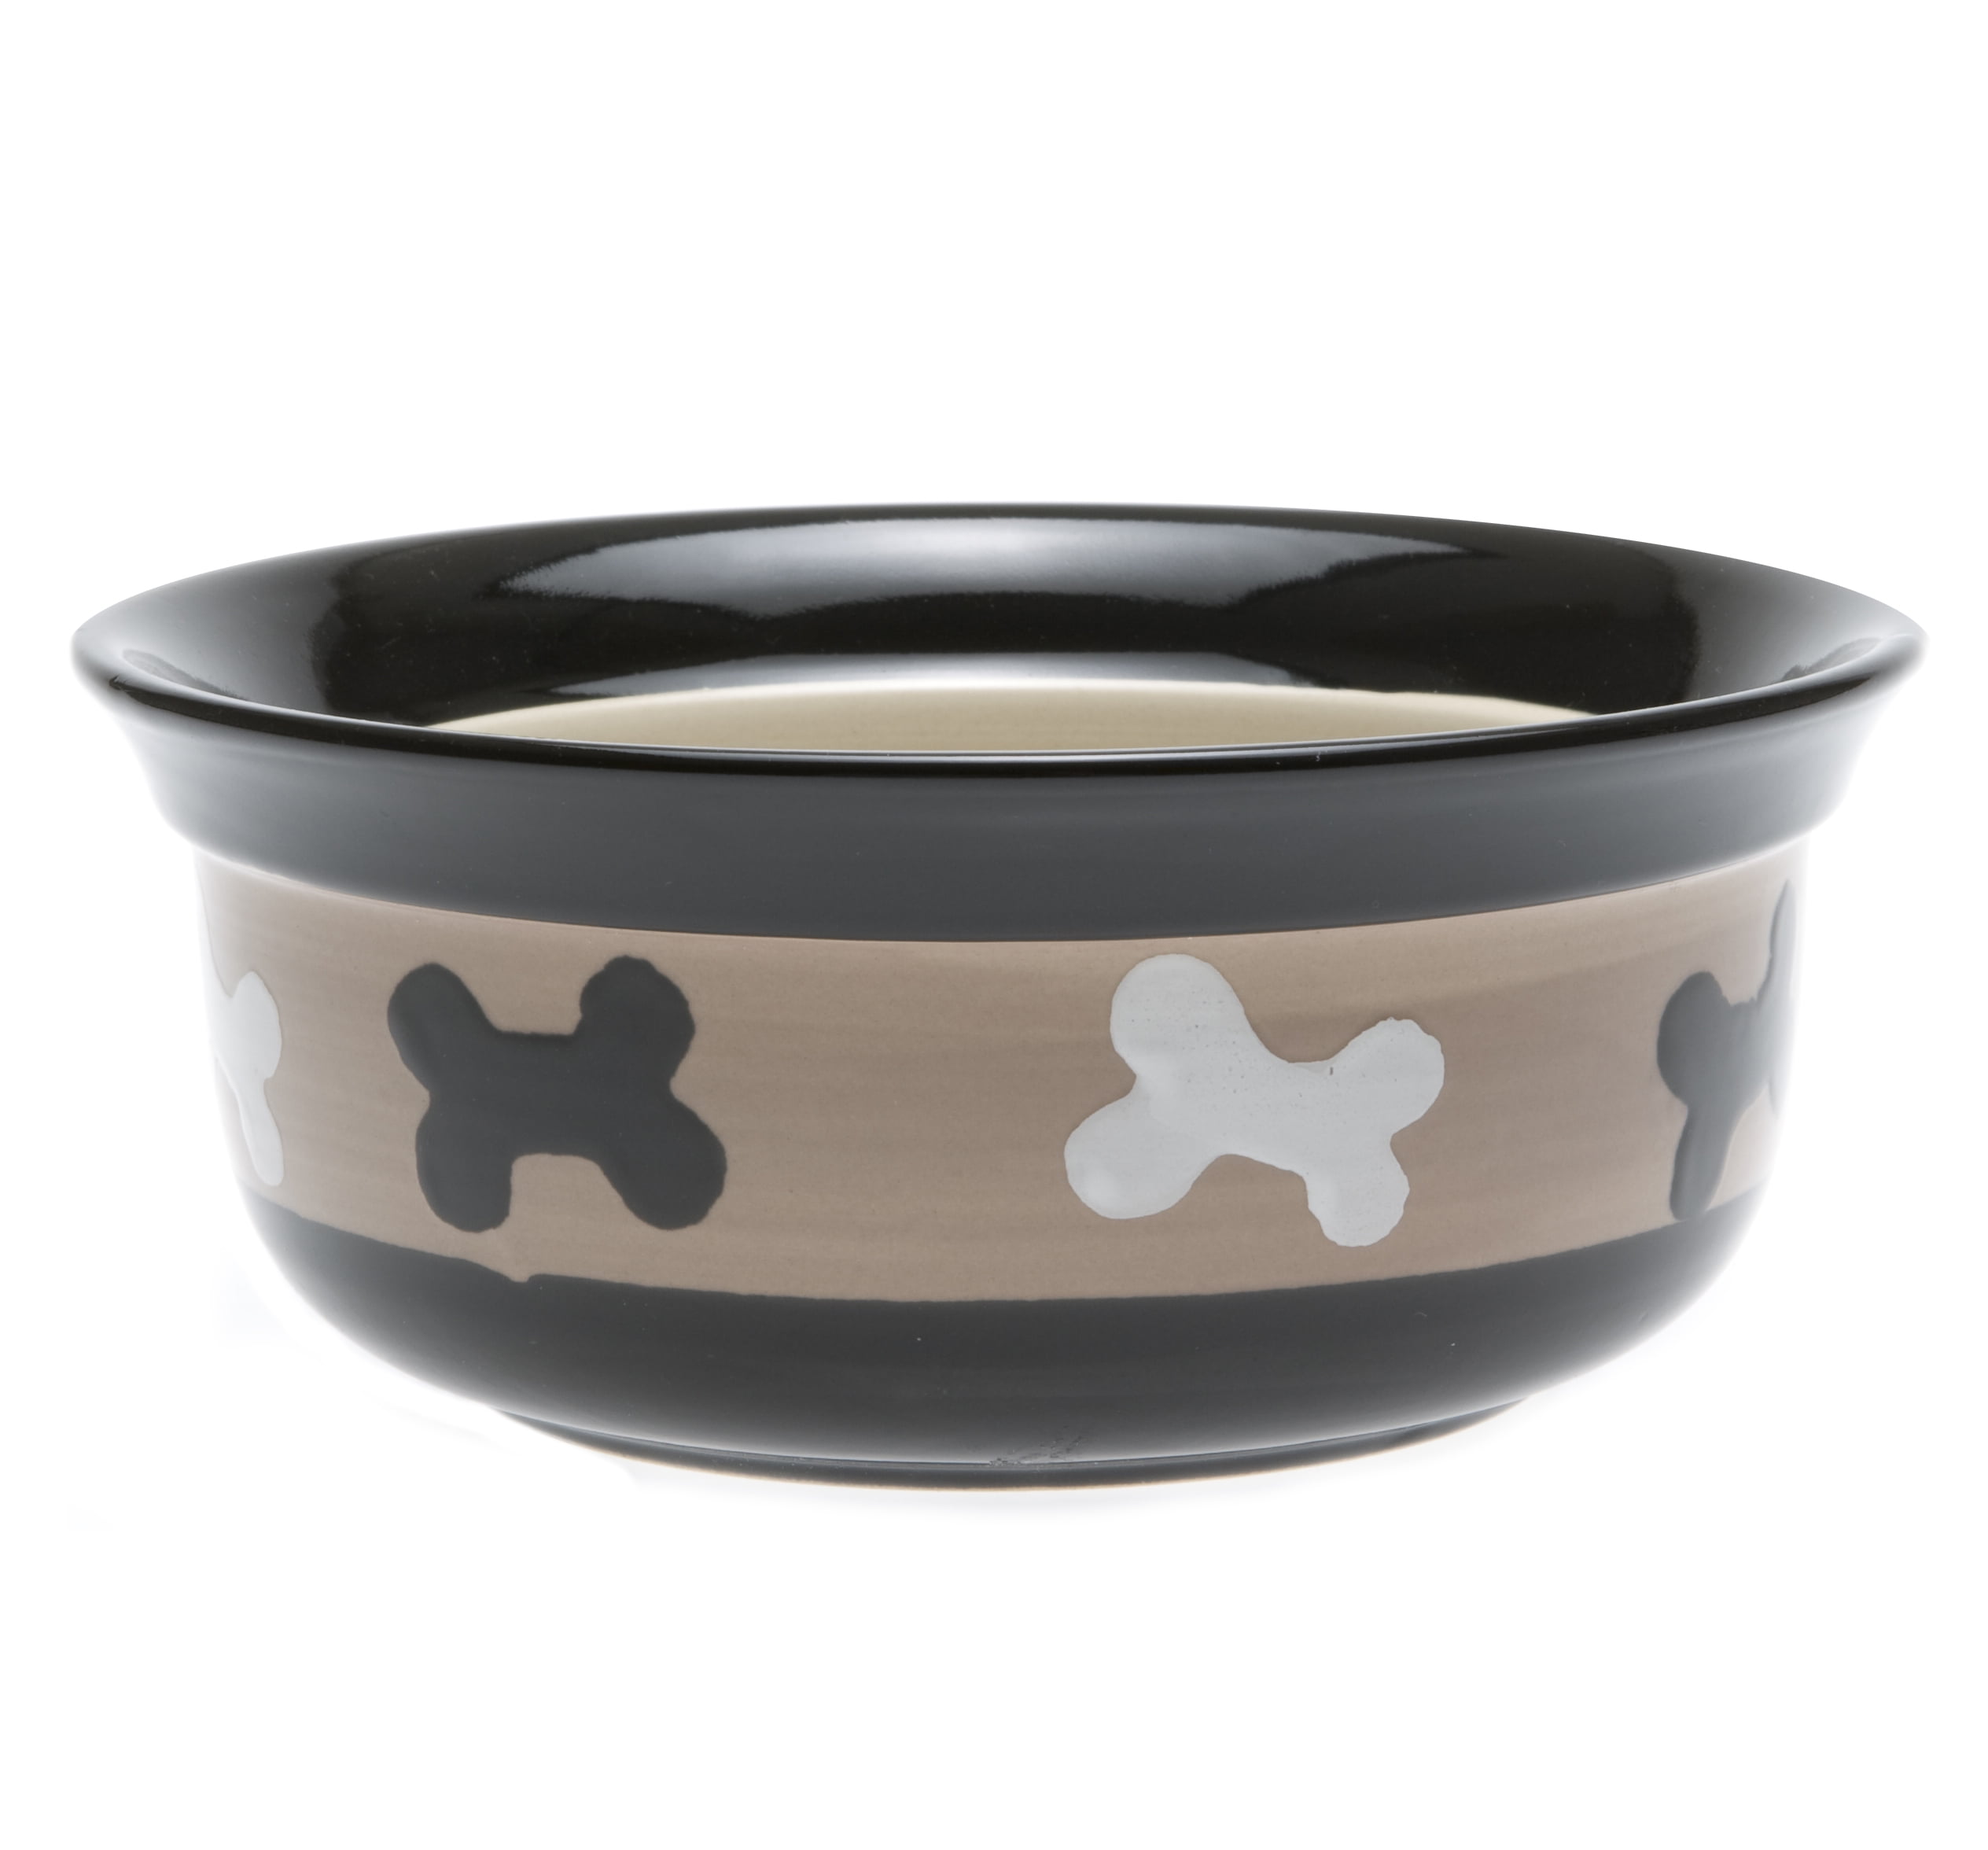 32-Ounce PetRageous 17001 Eat Drink Repeat Two-Tone Stoneware Dishwasher Safe Dog Bowl 4-Cup 8-Inch Diameter 3.75-Inch Tall for Medium and Large Dogs and Cats Off-White 